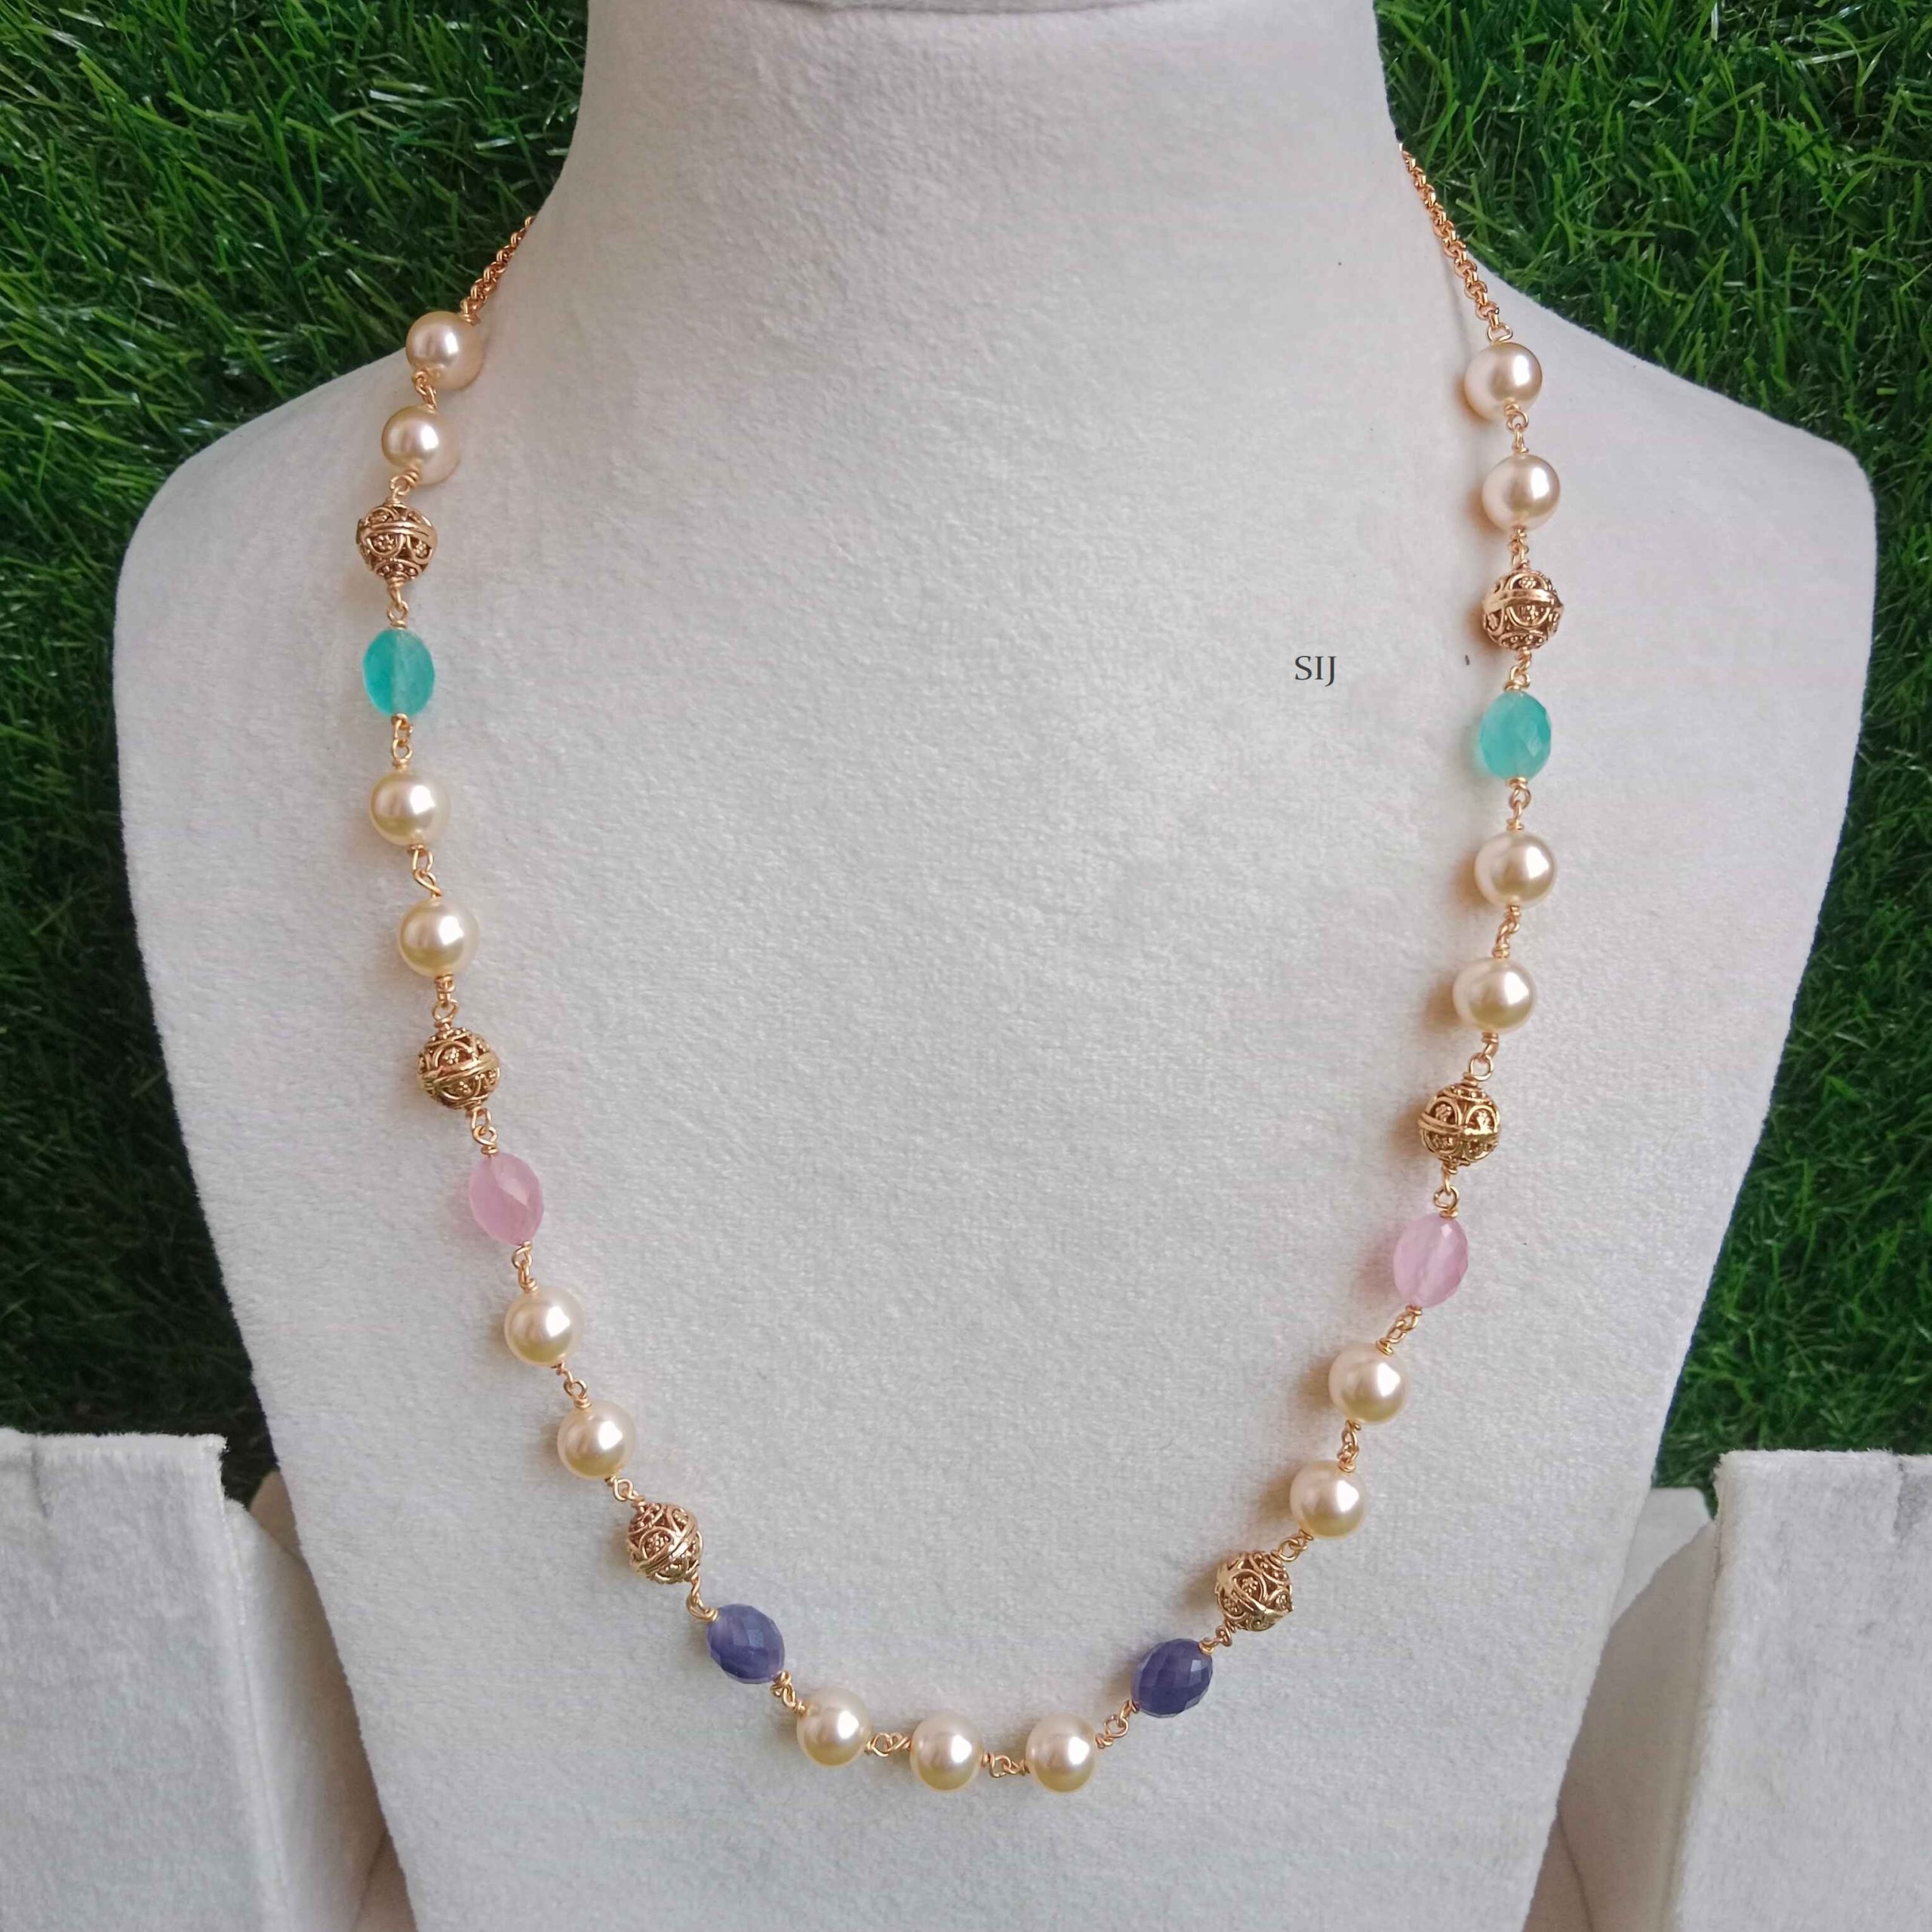 Multi Color Beads and Pearls Mala